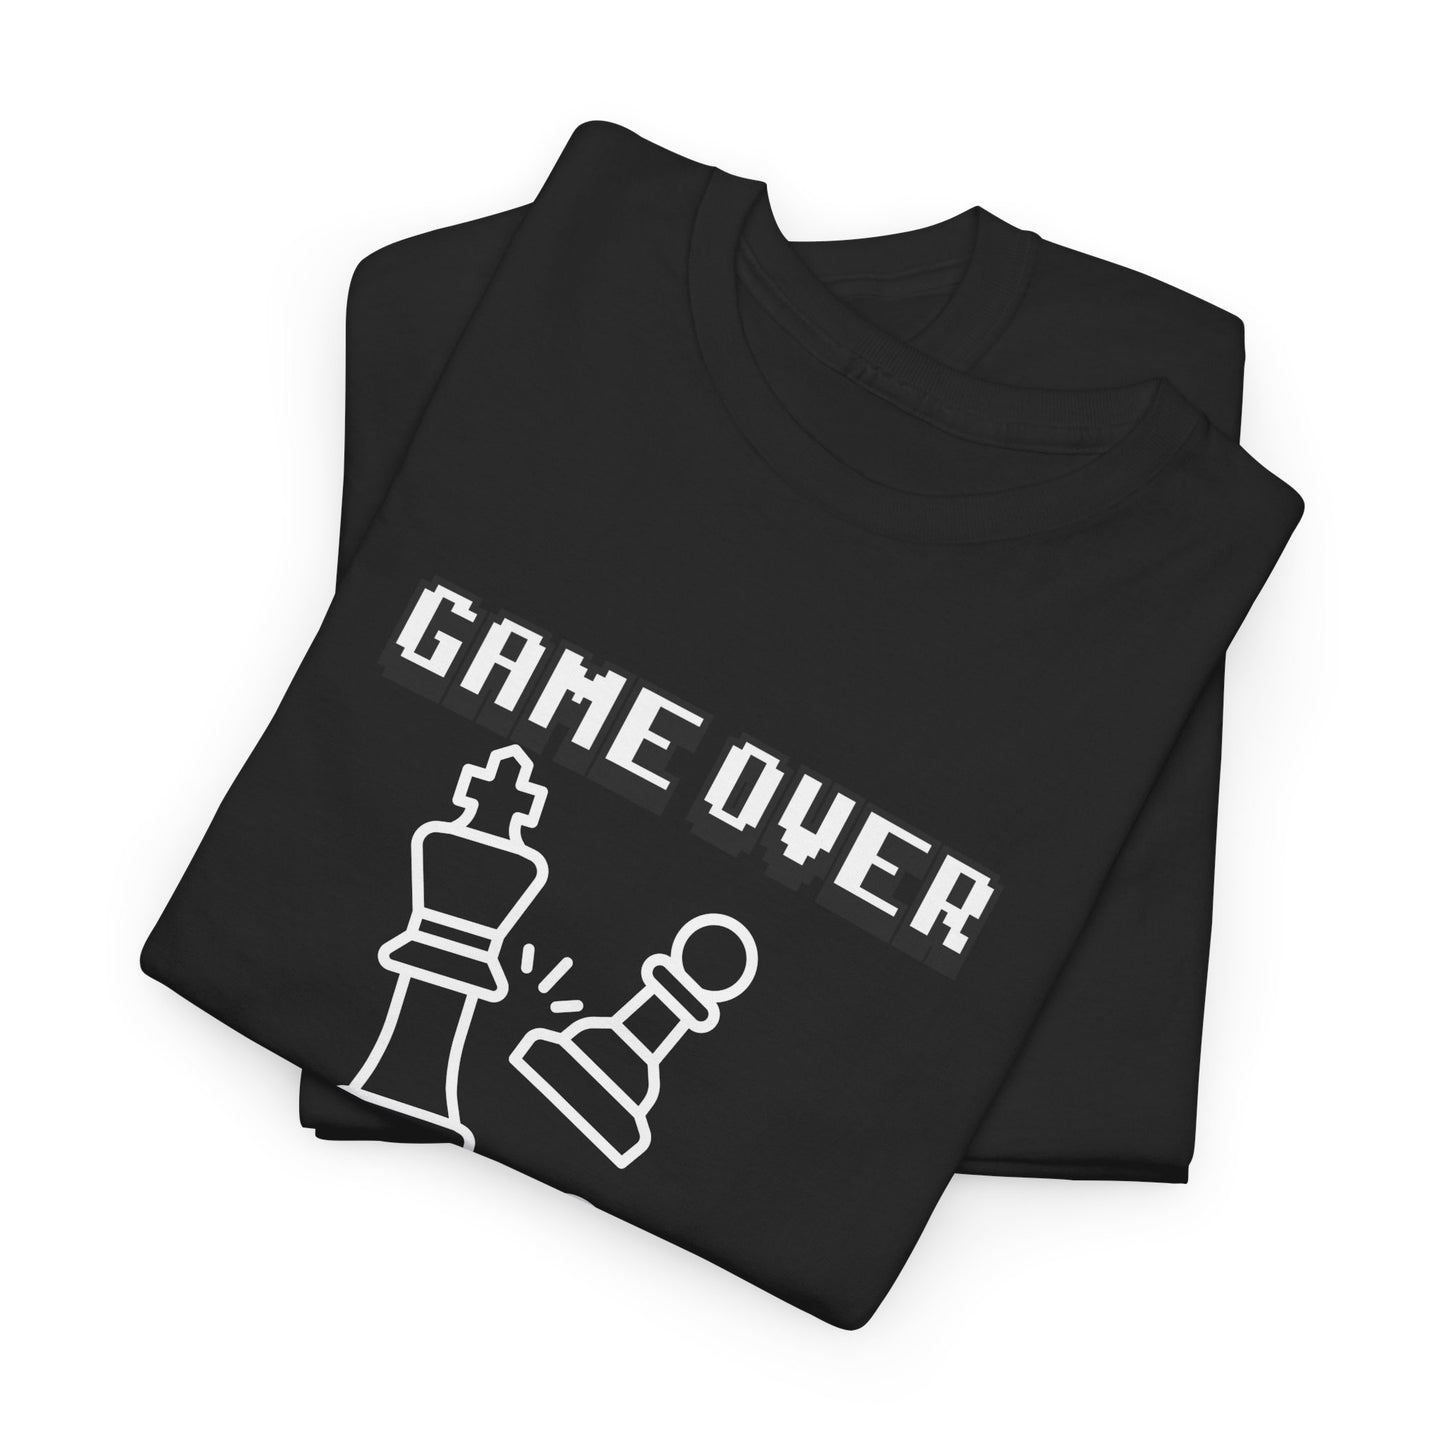 Game Over T-Shirt,  Gamer T-Shirt, Gaming Tee 100% Cotton, 4 Colours, AUS - USA warehouse, free post.